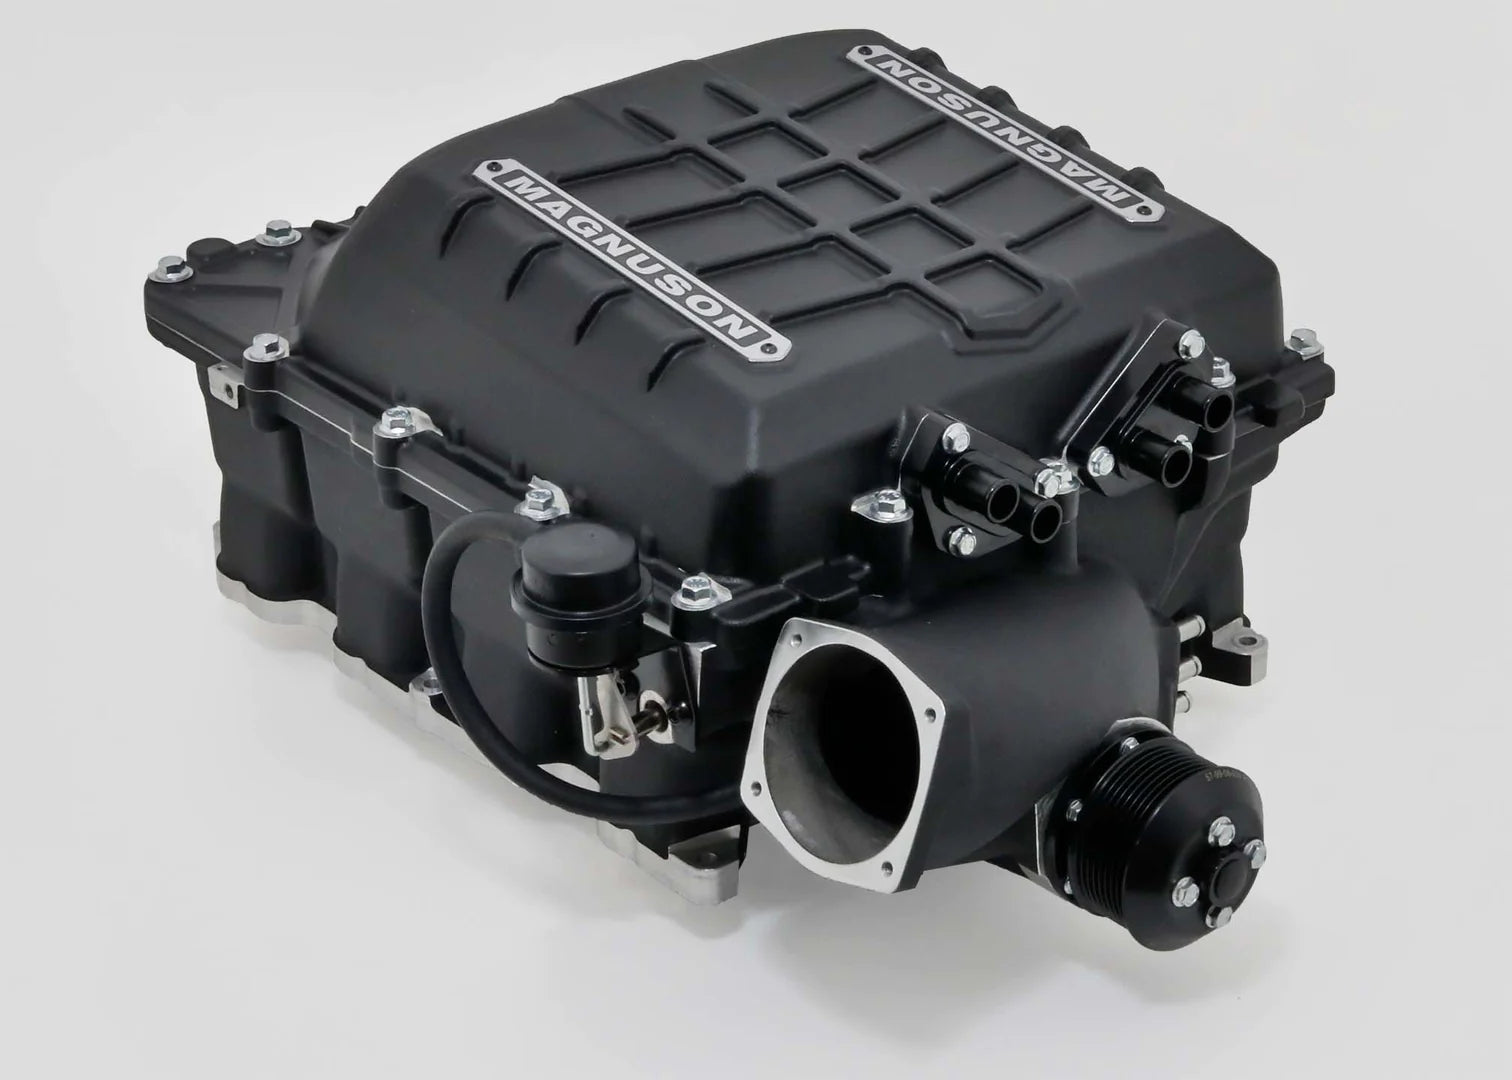 '19-21 Magnum Toyota Tundra (Flex Fuel) Supercharger System Magnuson Superchargers display